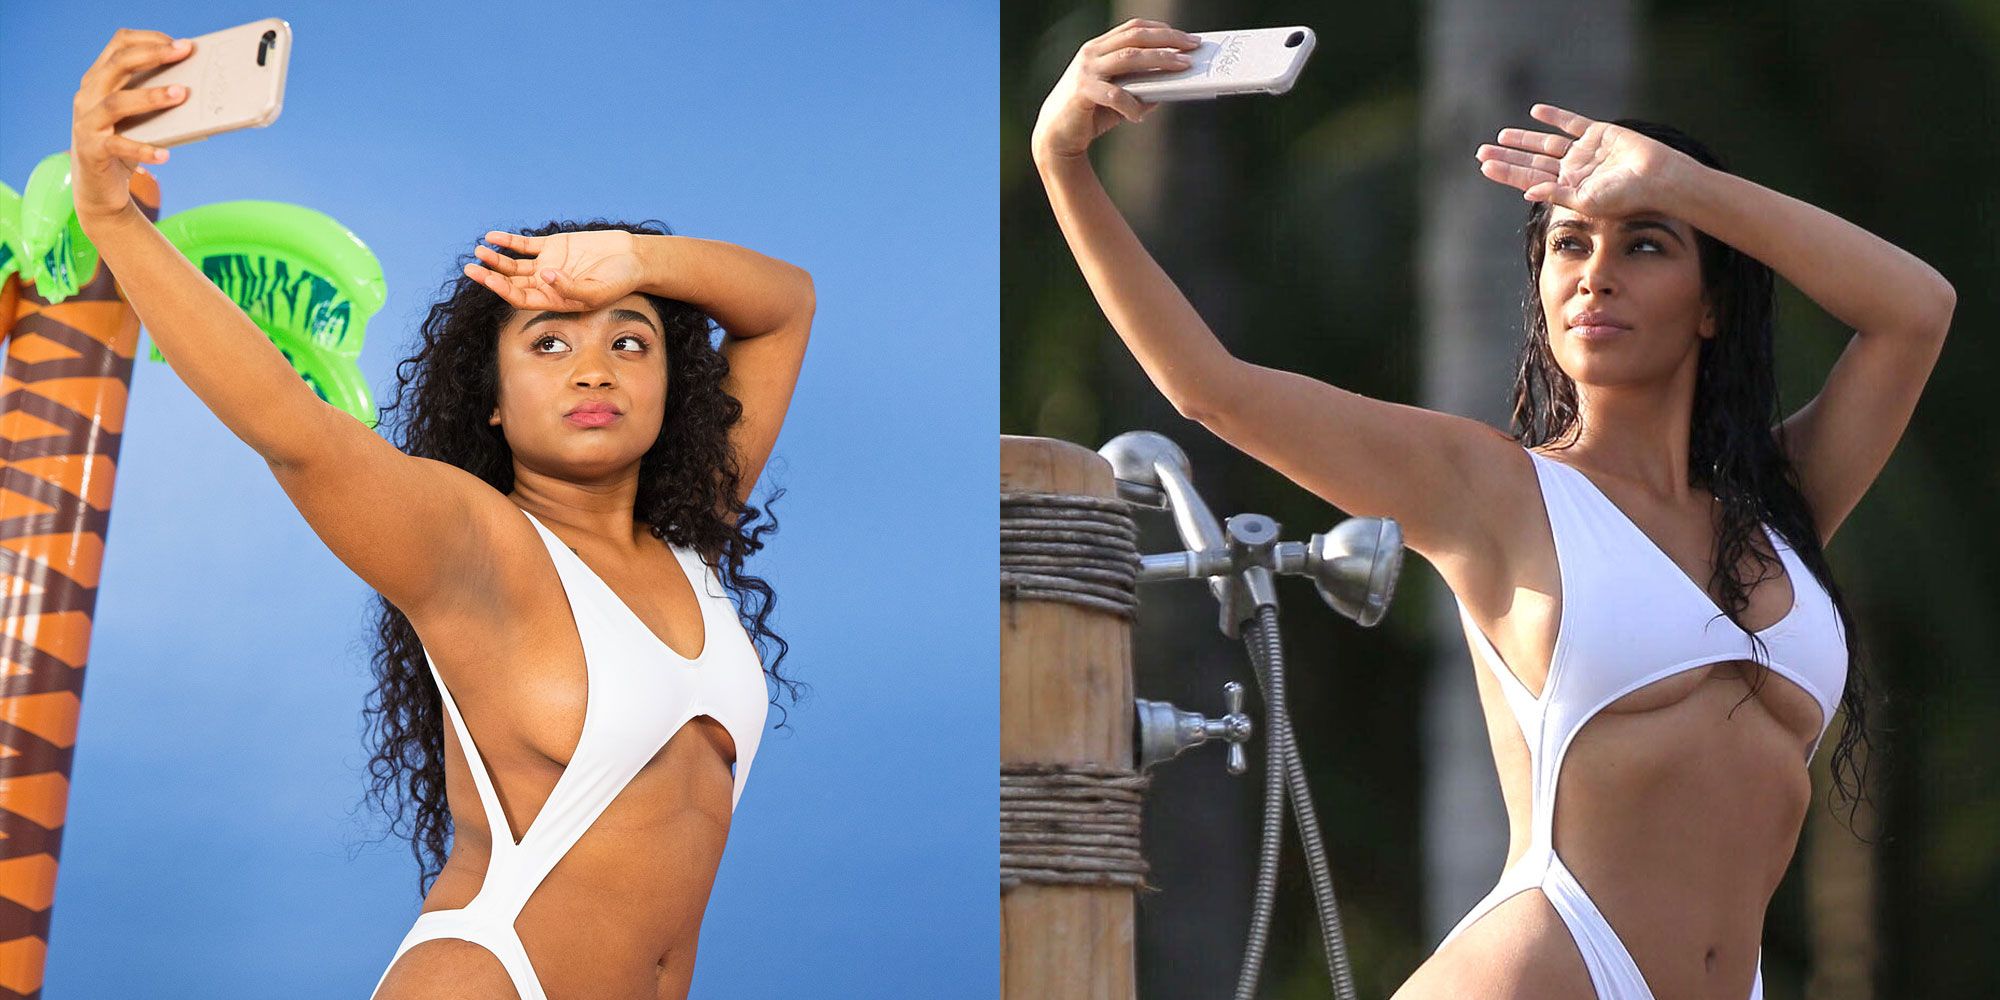 Photos of 5 Real Women In Outrageous Swimsuits - Women Wearing